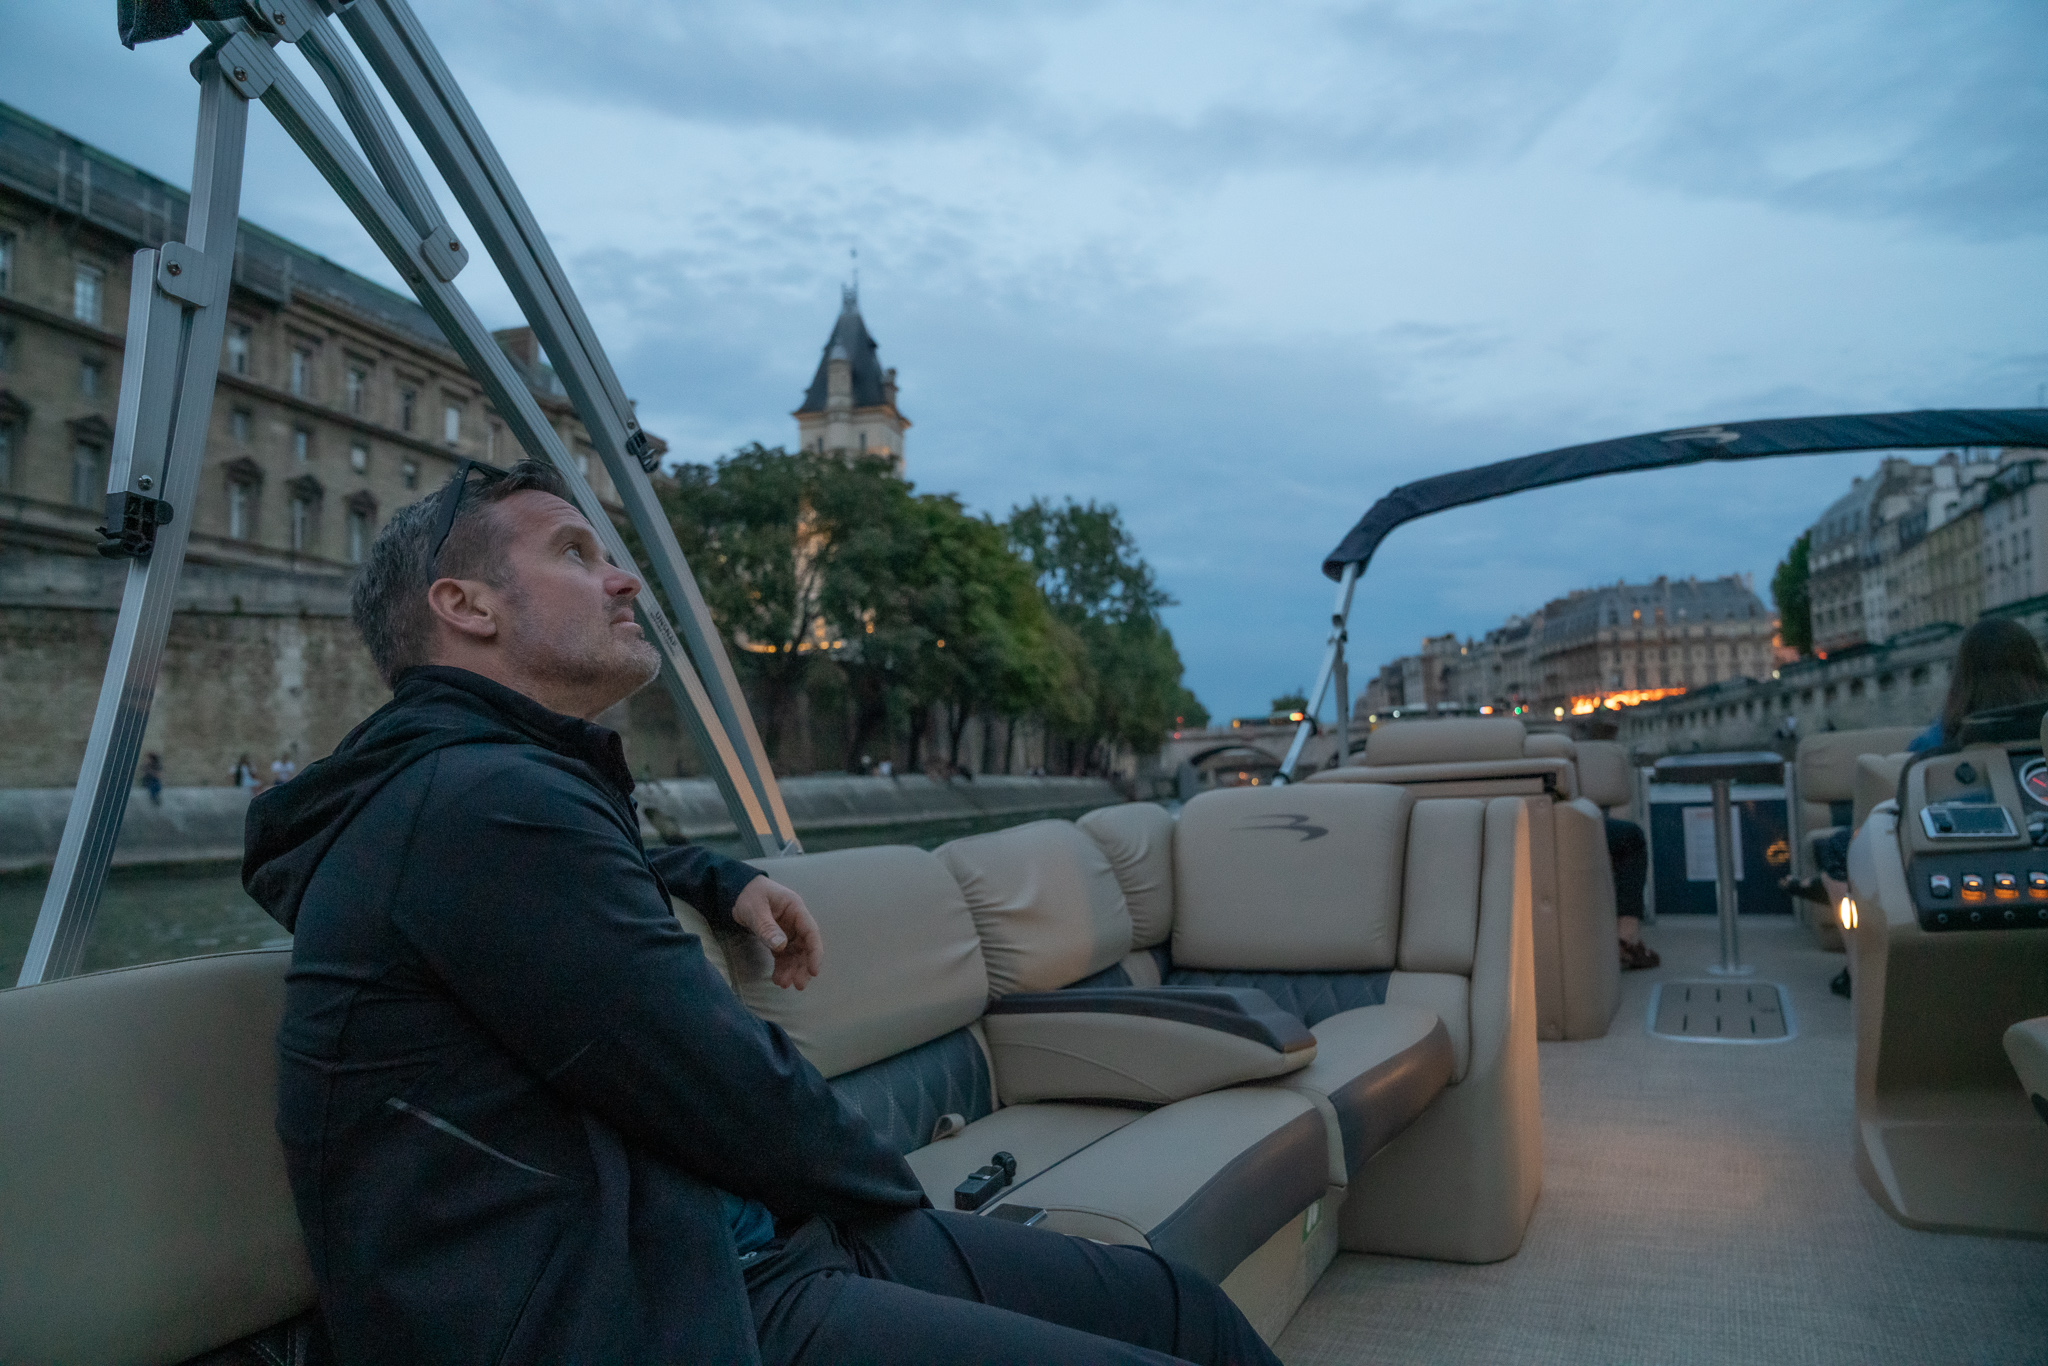 Man sitting in a private boat at dusk on the Seine river in Paris, France